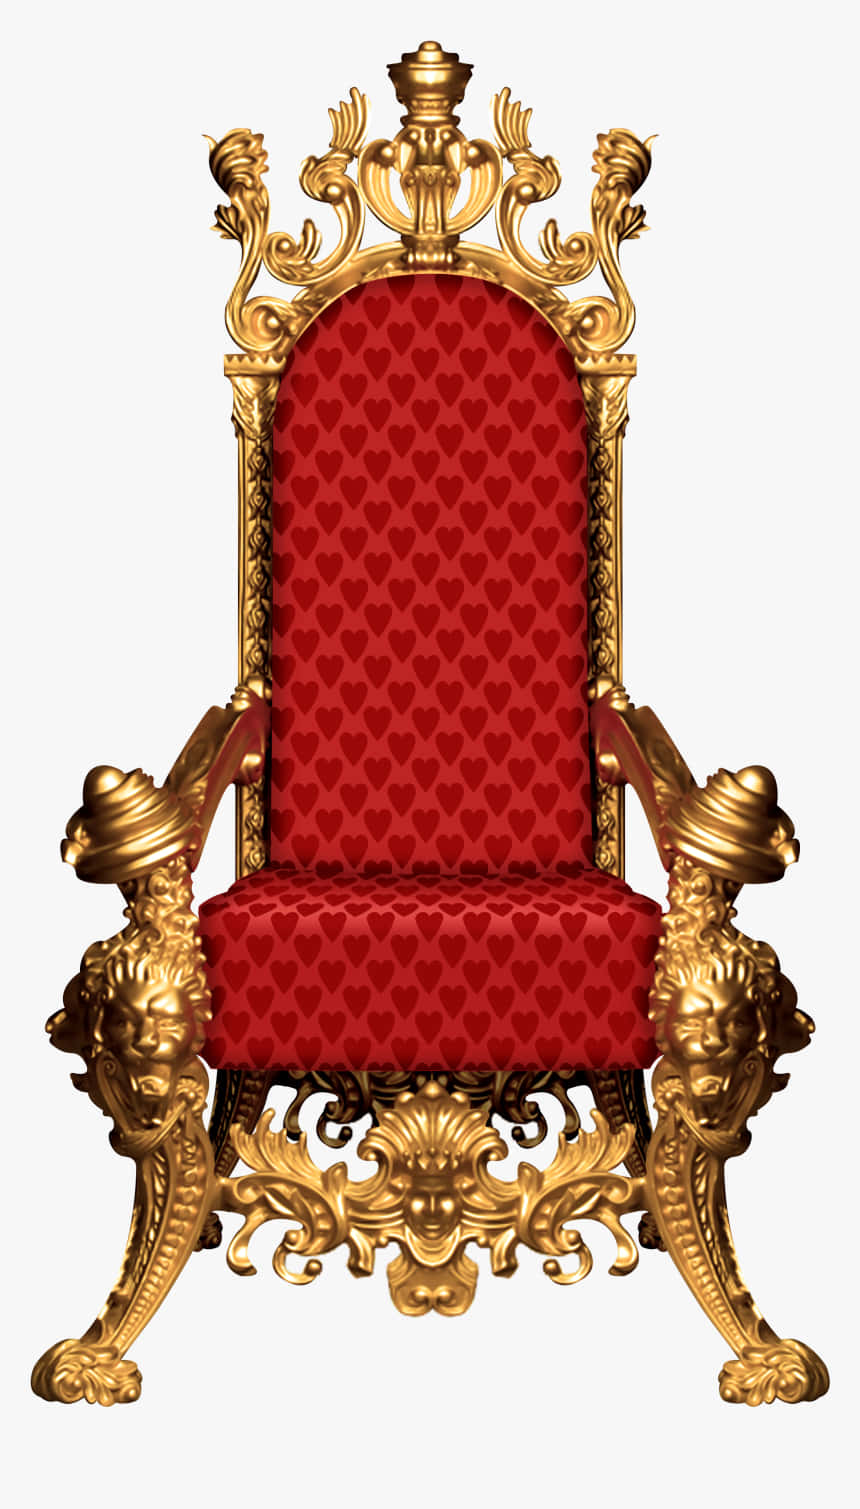 A Red And Gold Throne On A White Background